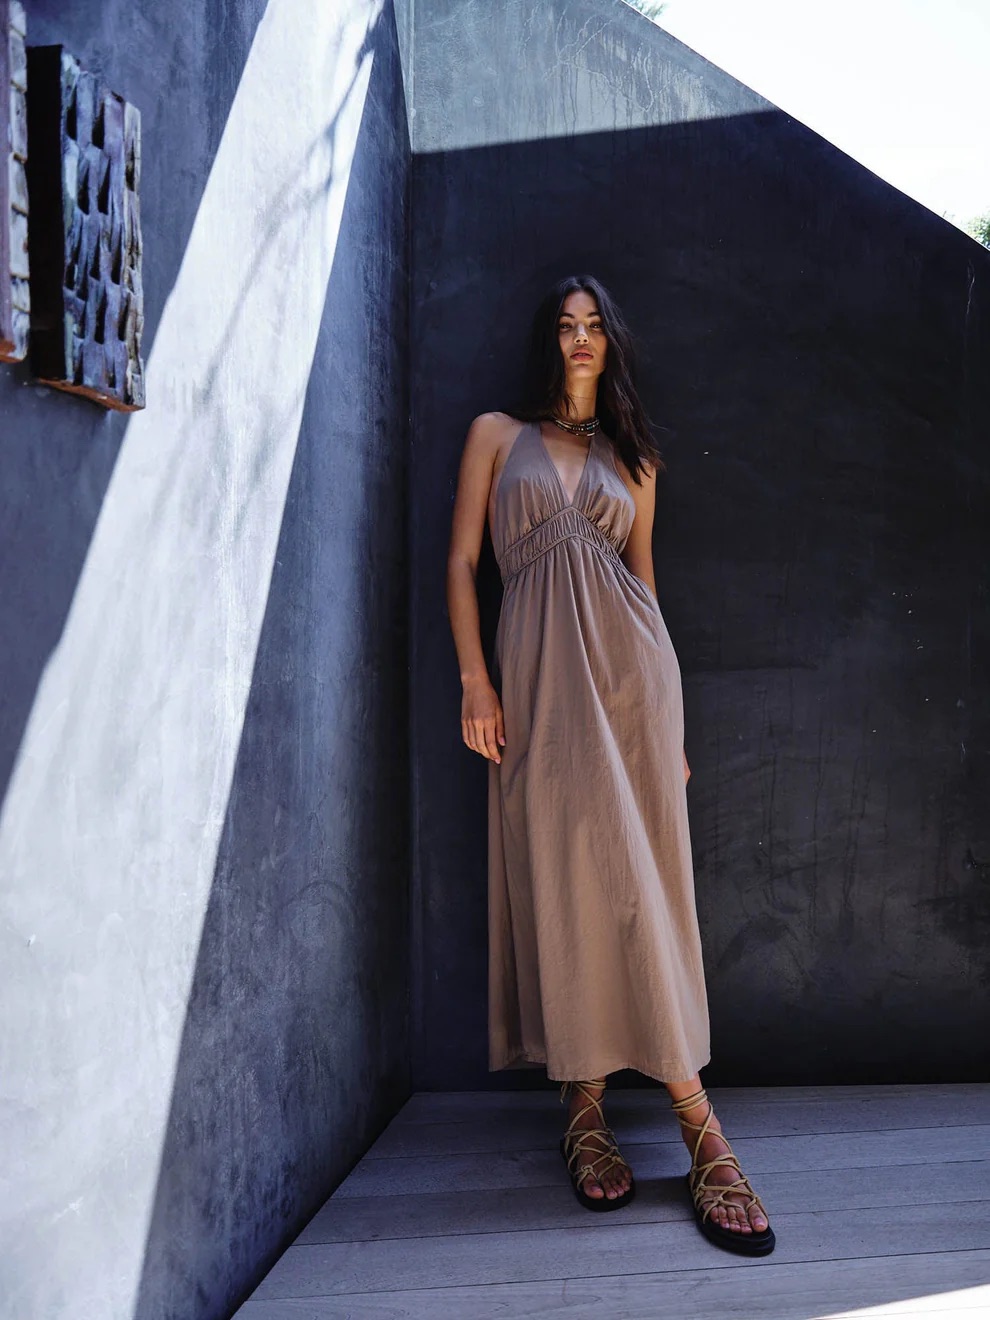 A woman in a beige dress stands confidently between dark architectural walls, with light casting shadows around her.